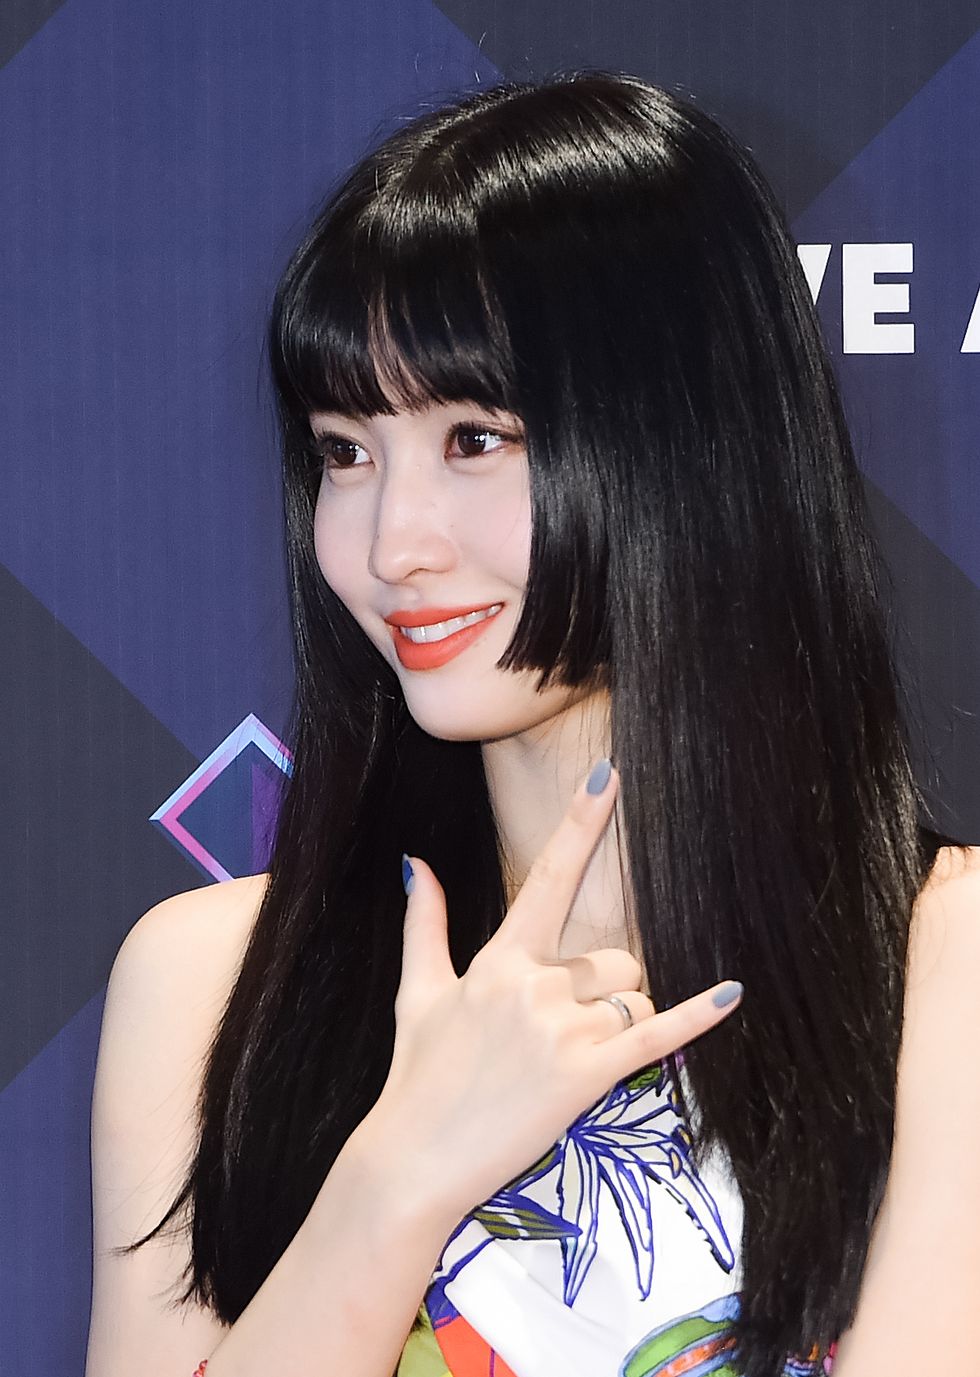 momo of twice attends the rehearsal of m countdown at cj em on april 25th in seoul, south korea photoosen